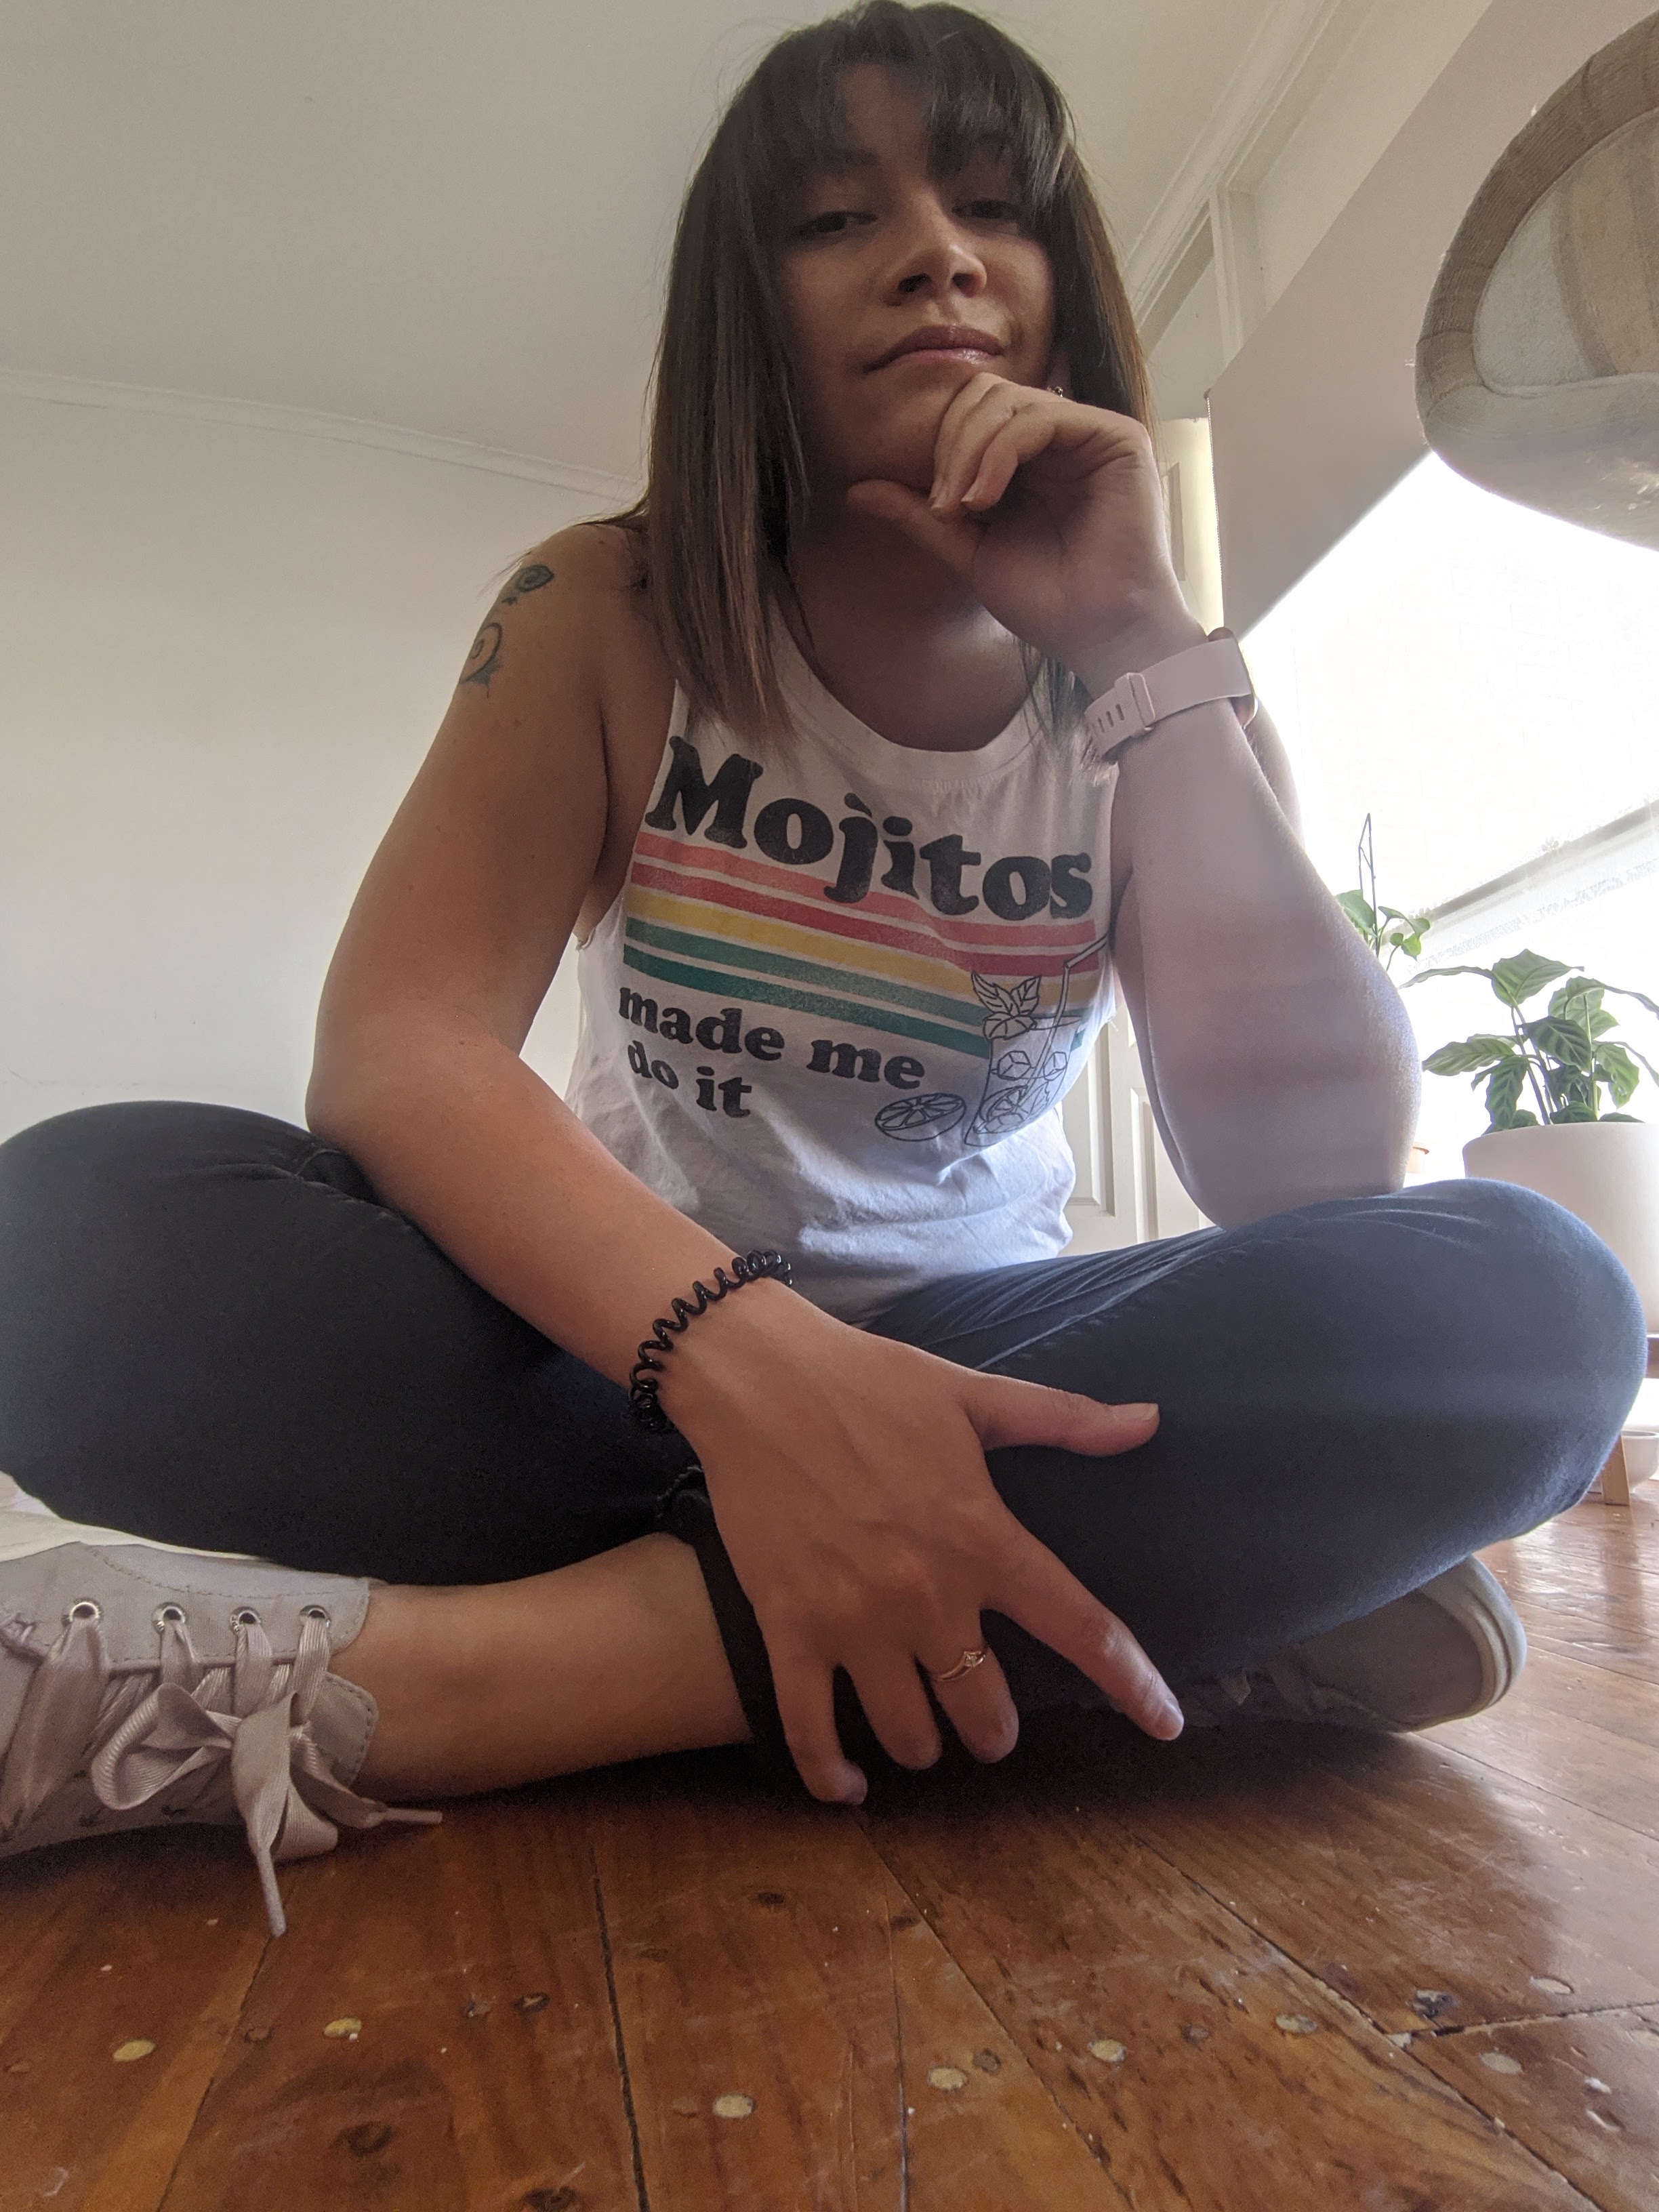 A light-skinned woman with long brown hair sits cross-legged on the floor with one hand under her chin. She is wearing white sneakers, black sweatpants, and a white tank top that reads 'Mojitos made me do it'. She is half-smiling at the camera, which is looking up at her from the floor.